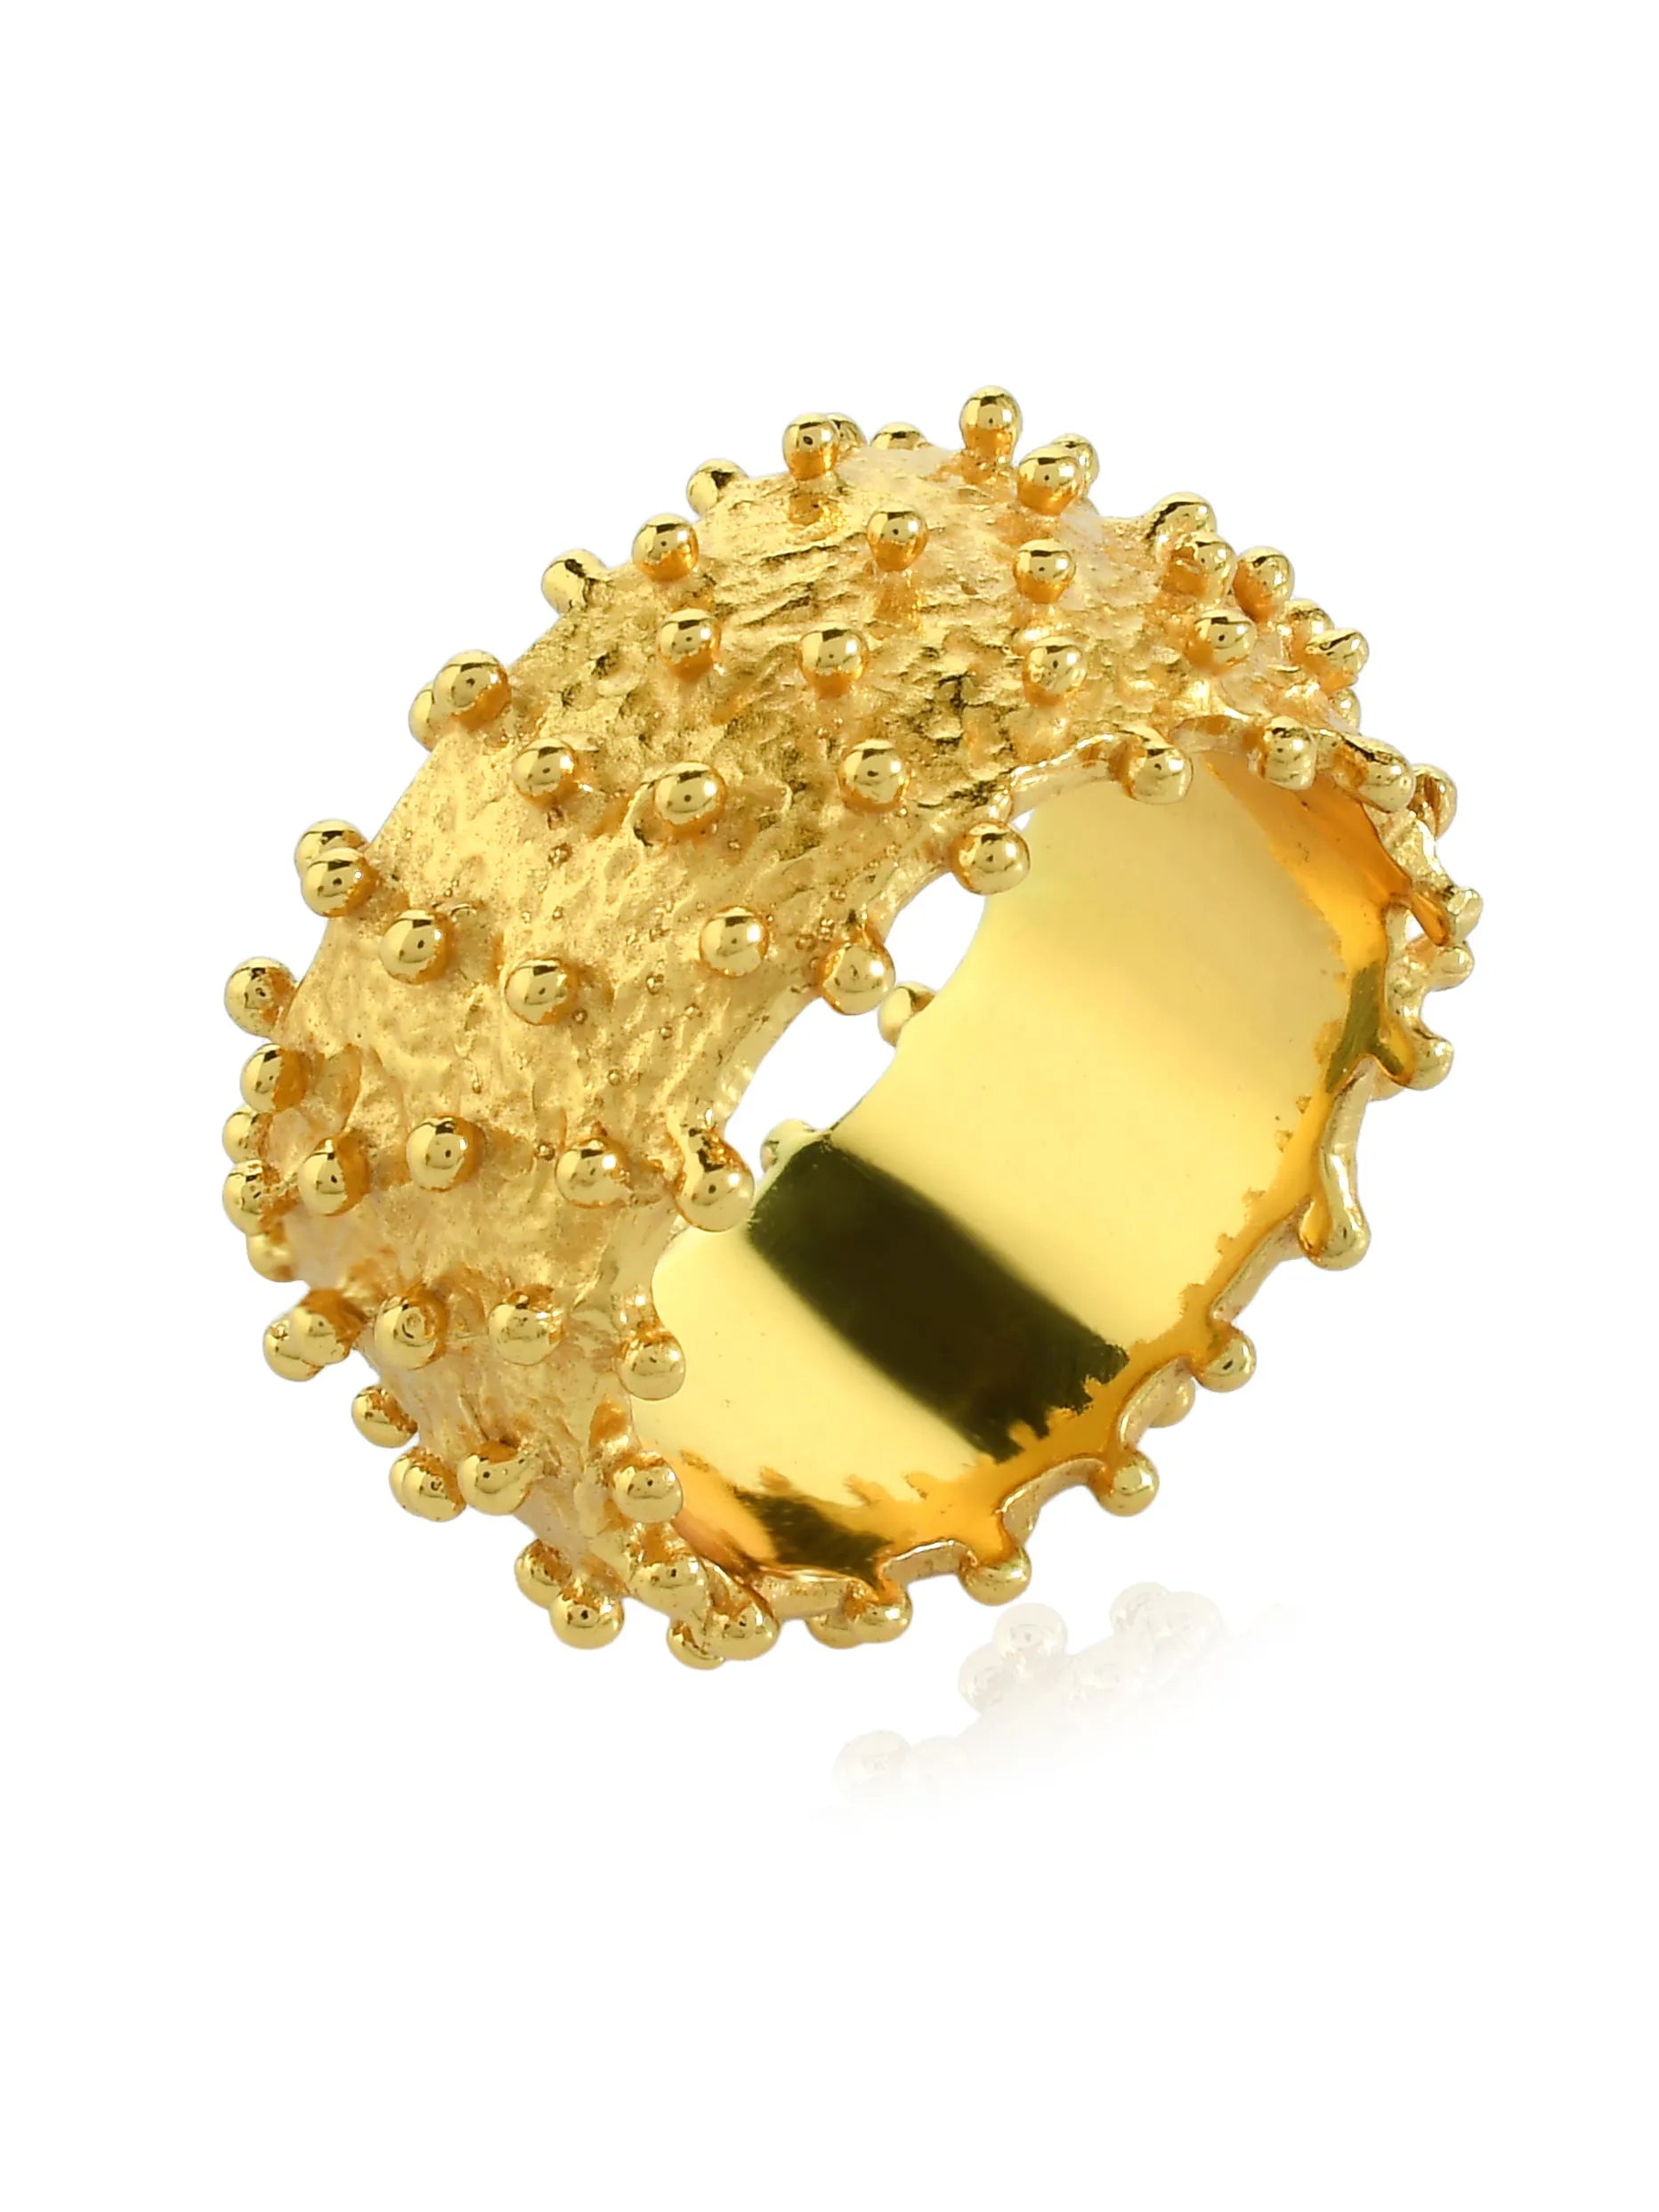 A stunning Shyla gold plated ring adorned with numerous handmade gold balls, perfect for dressing up.